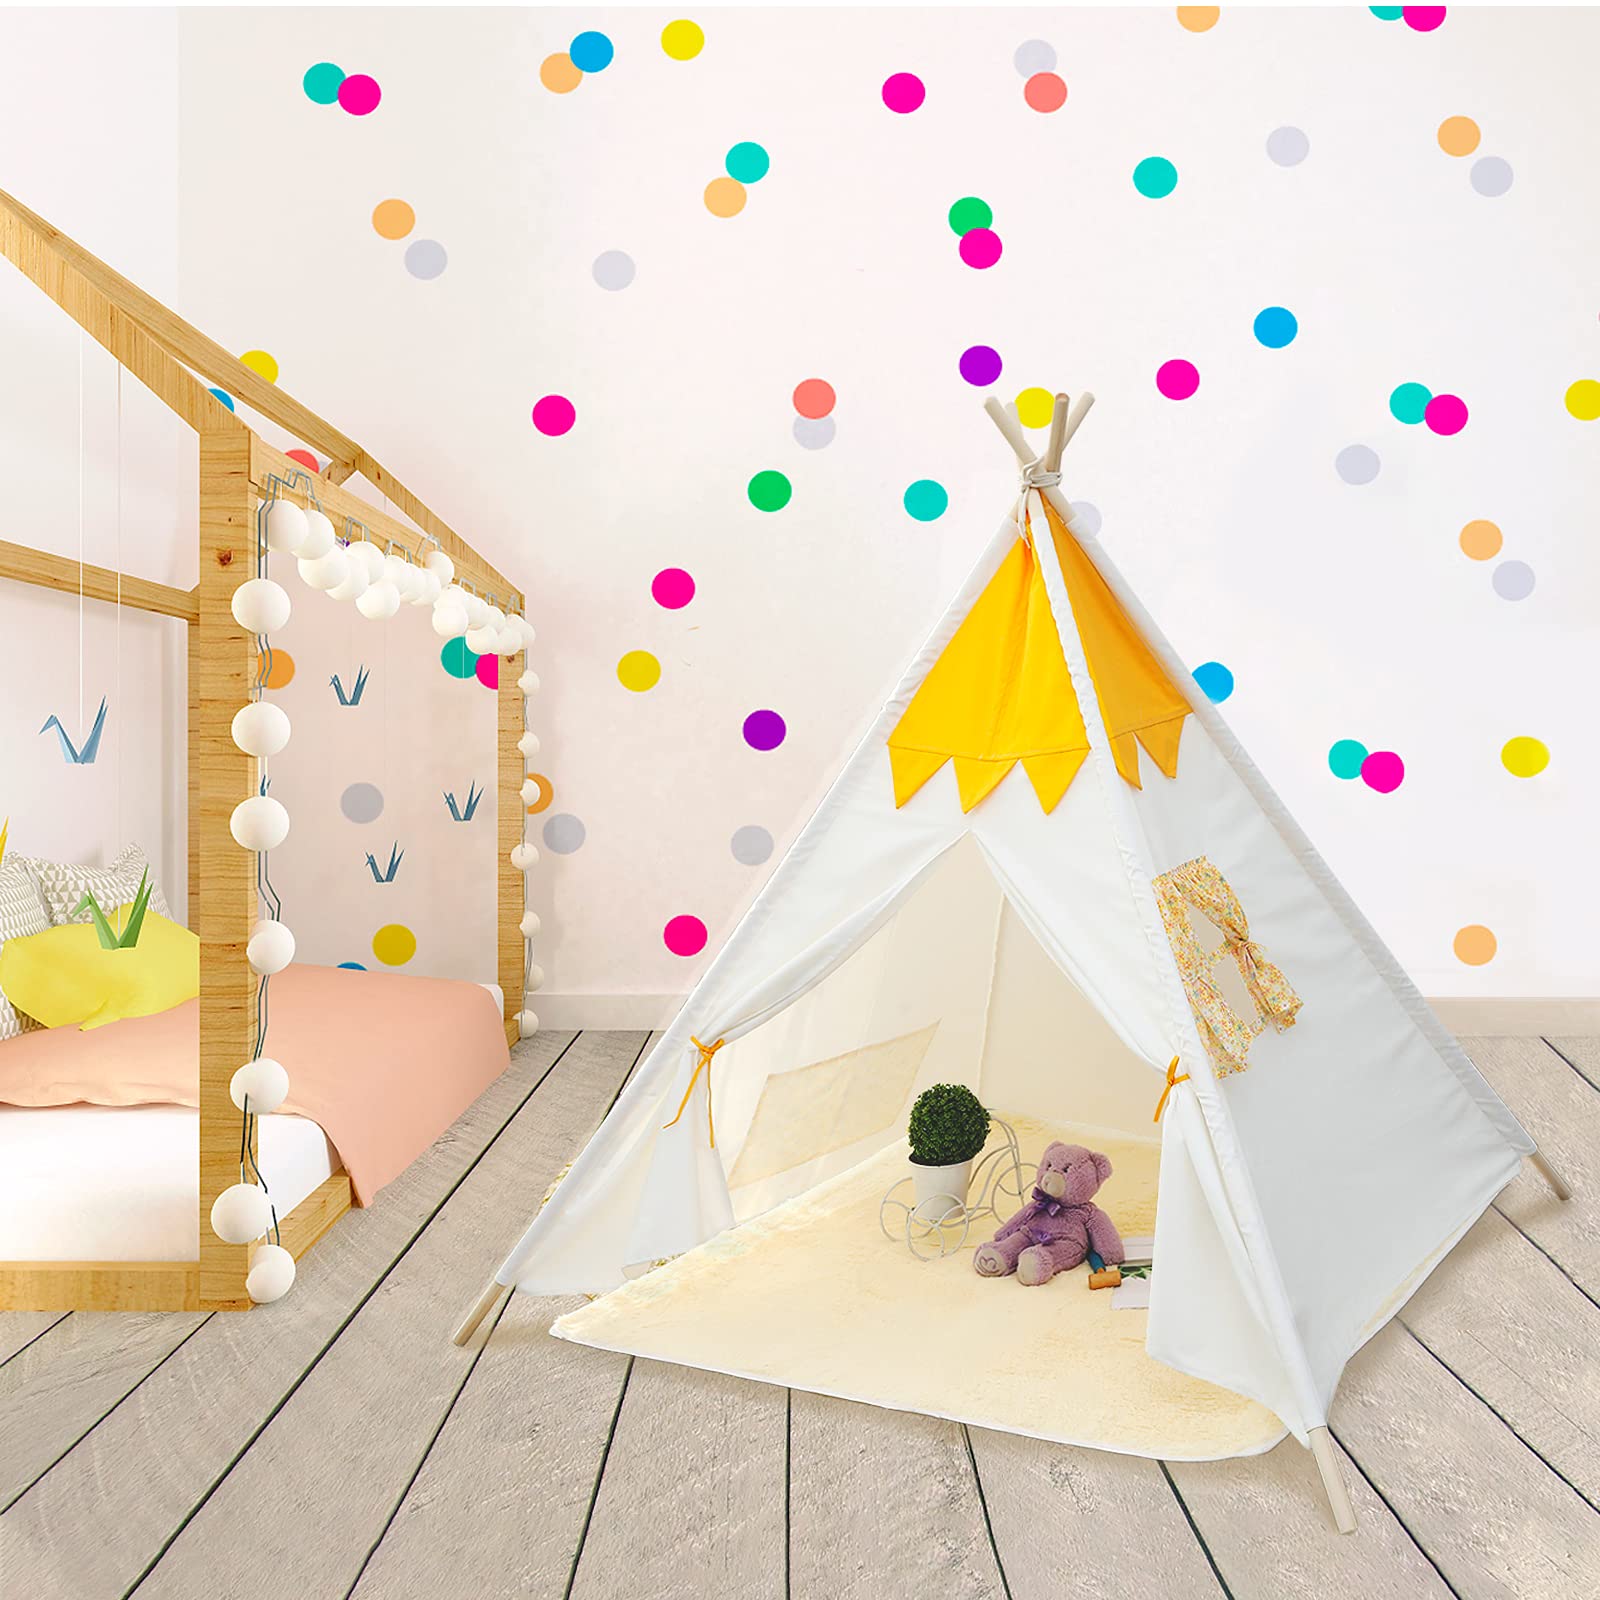 Teepee Tent for Kids Foldable Play Tent for Girls Boys with Play Mat Kids Canvas Tent Children Decor Tipi Toddler Playhouse for Indoor Outdoor Toys for Kids Birthday Gift Featured Image